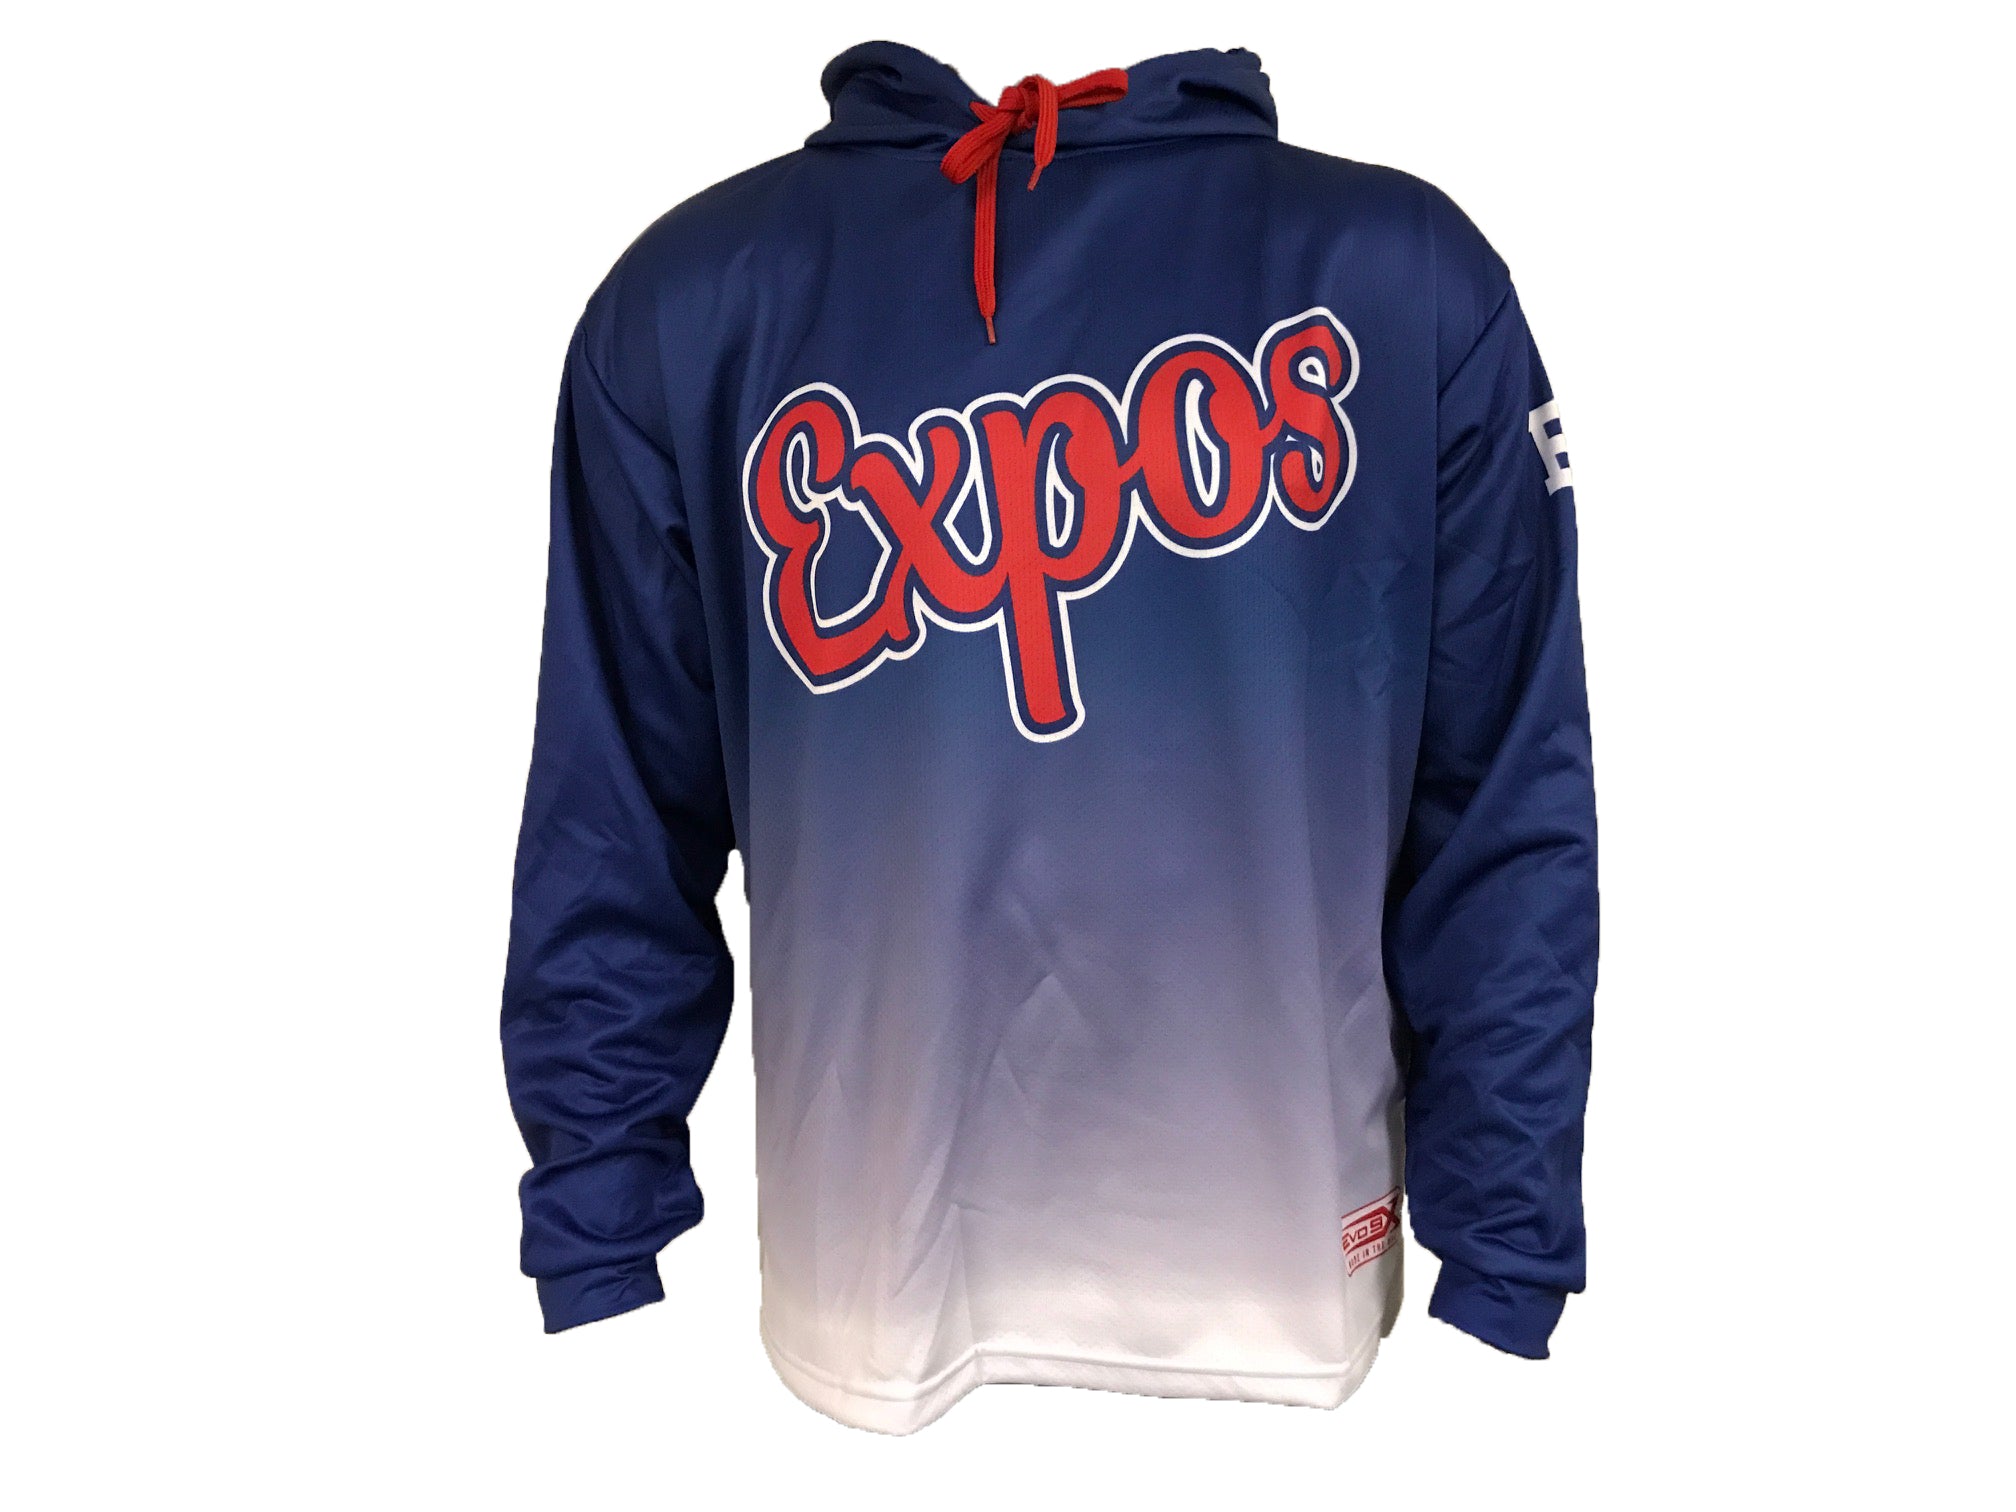 EXPOS Baseball Sublimated Hoodie Red/Blue